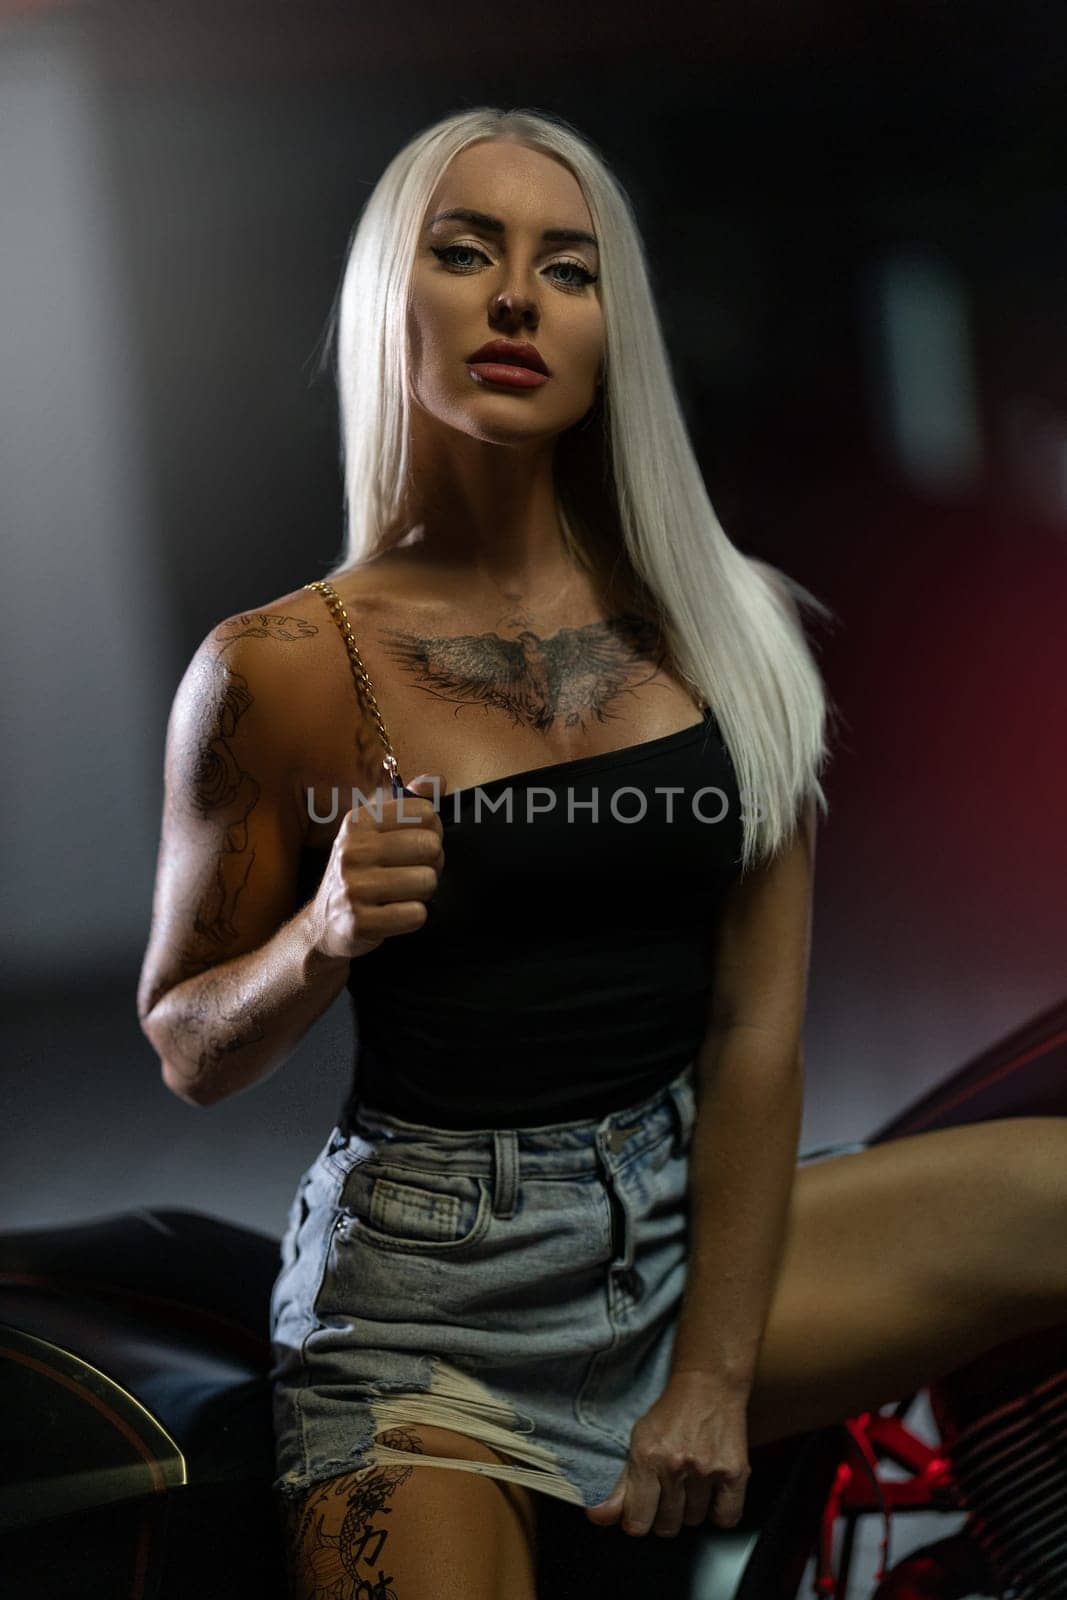 Sexy blonde girl with tattoos posing leaning on motorcycle in the parking by but_photo